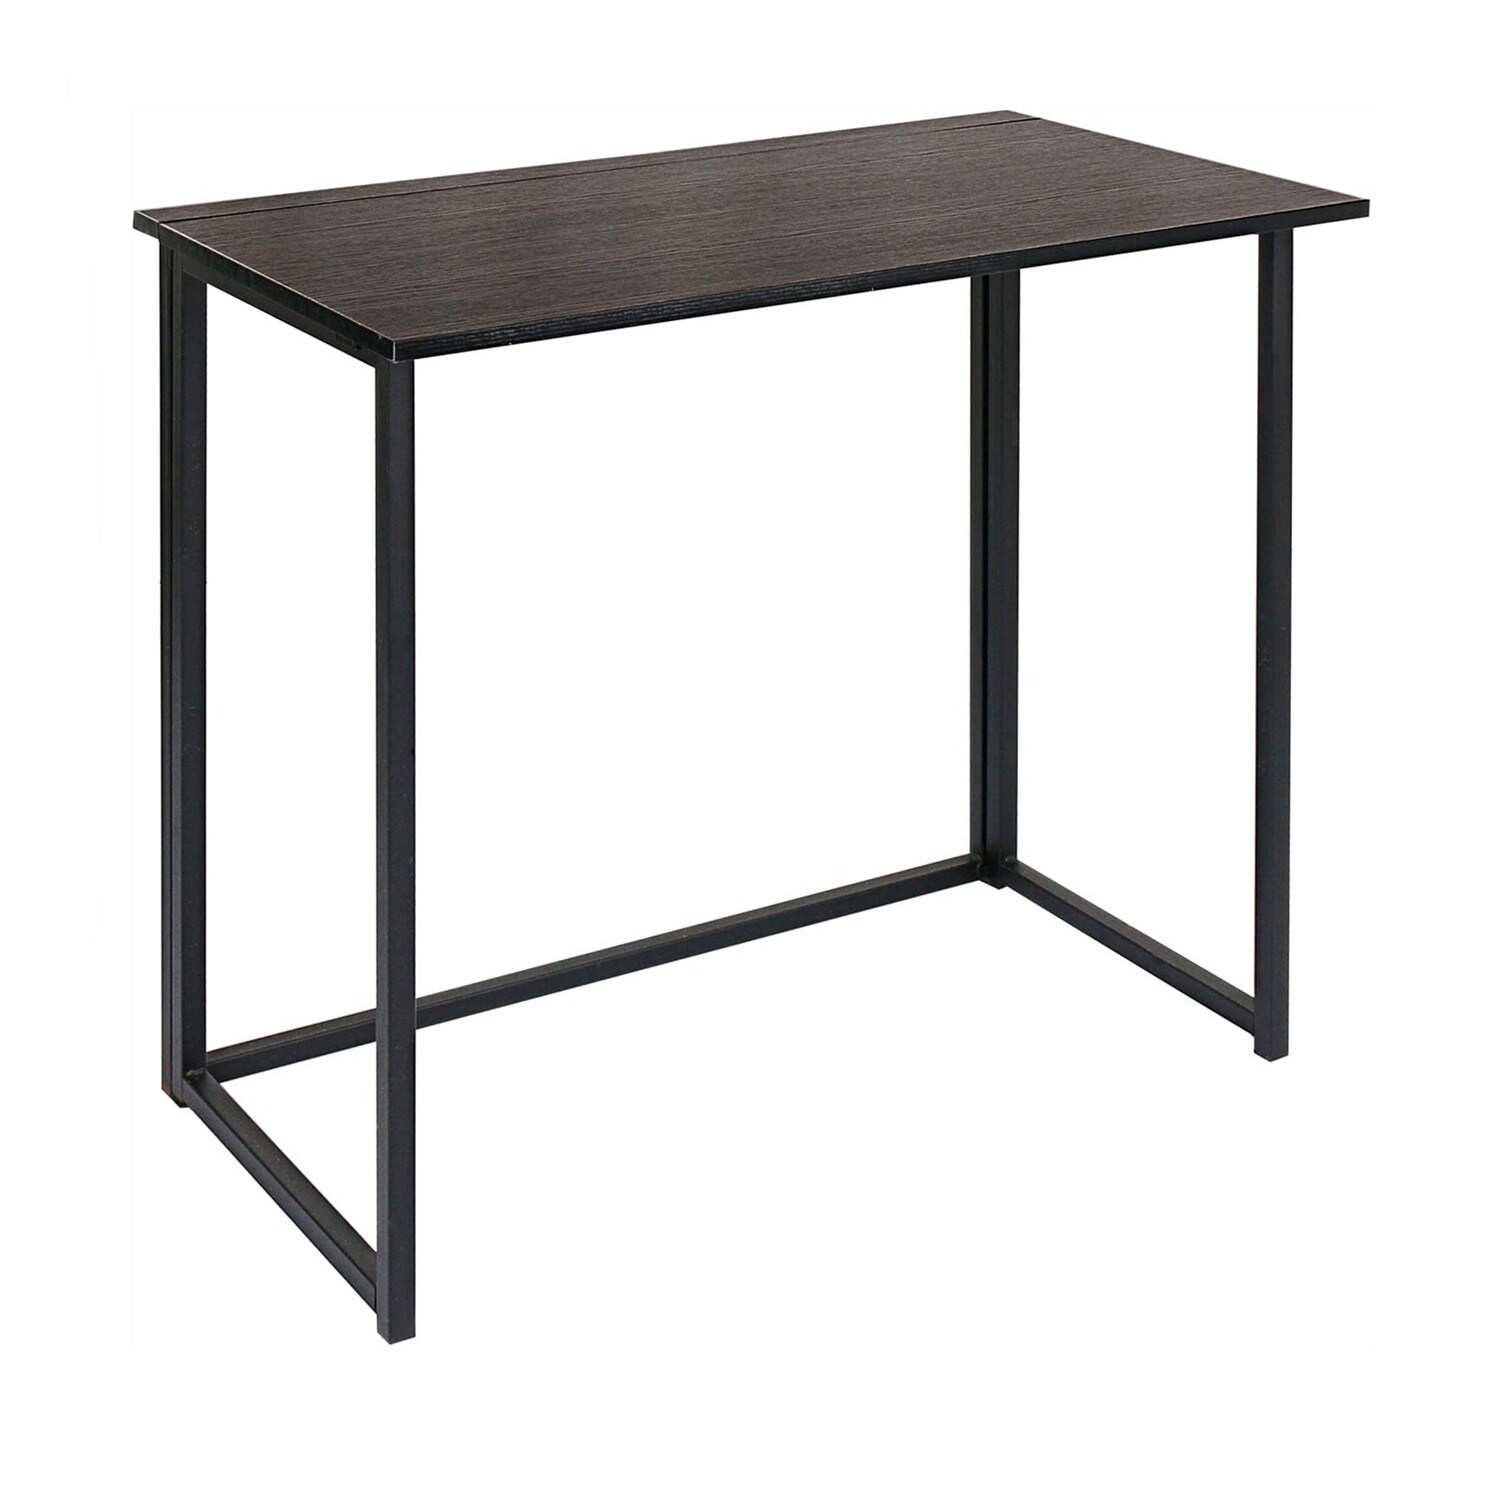 GZMR Folding Tables at Lowes.com